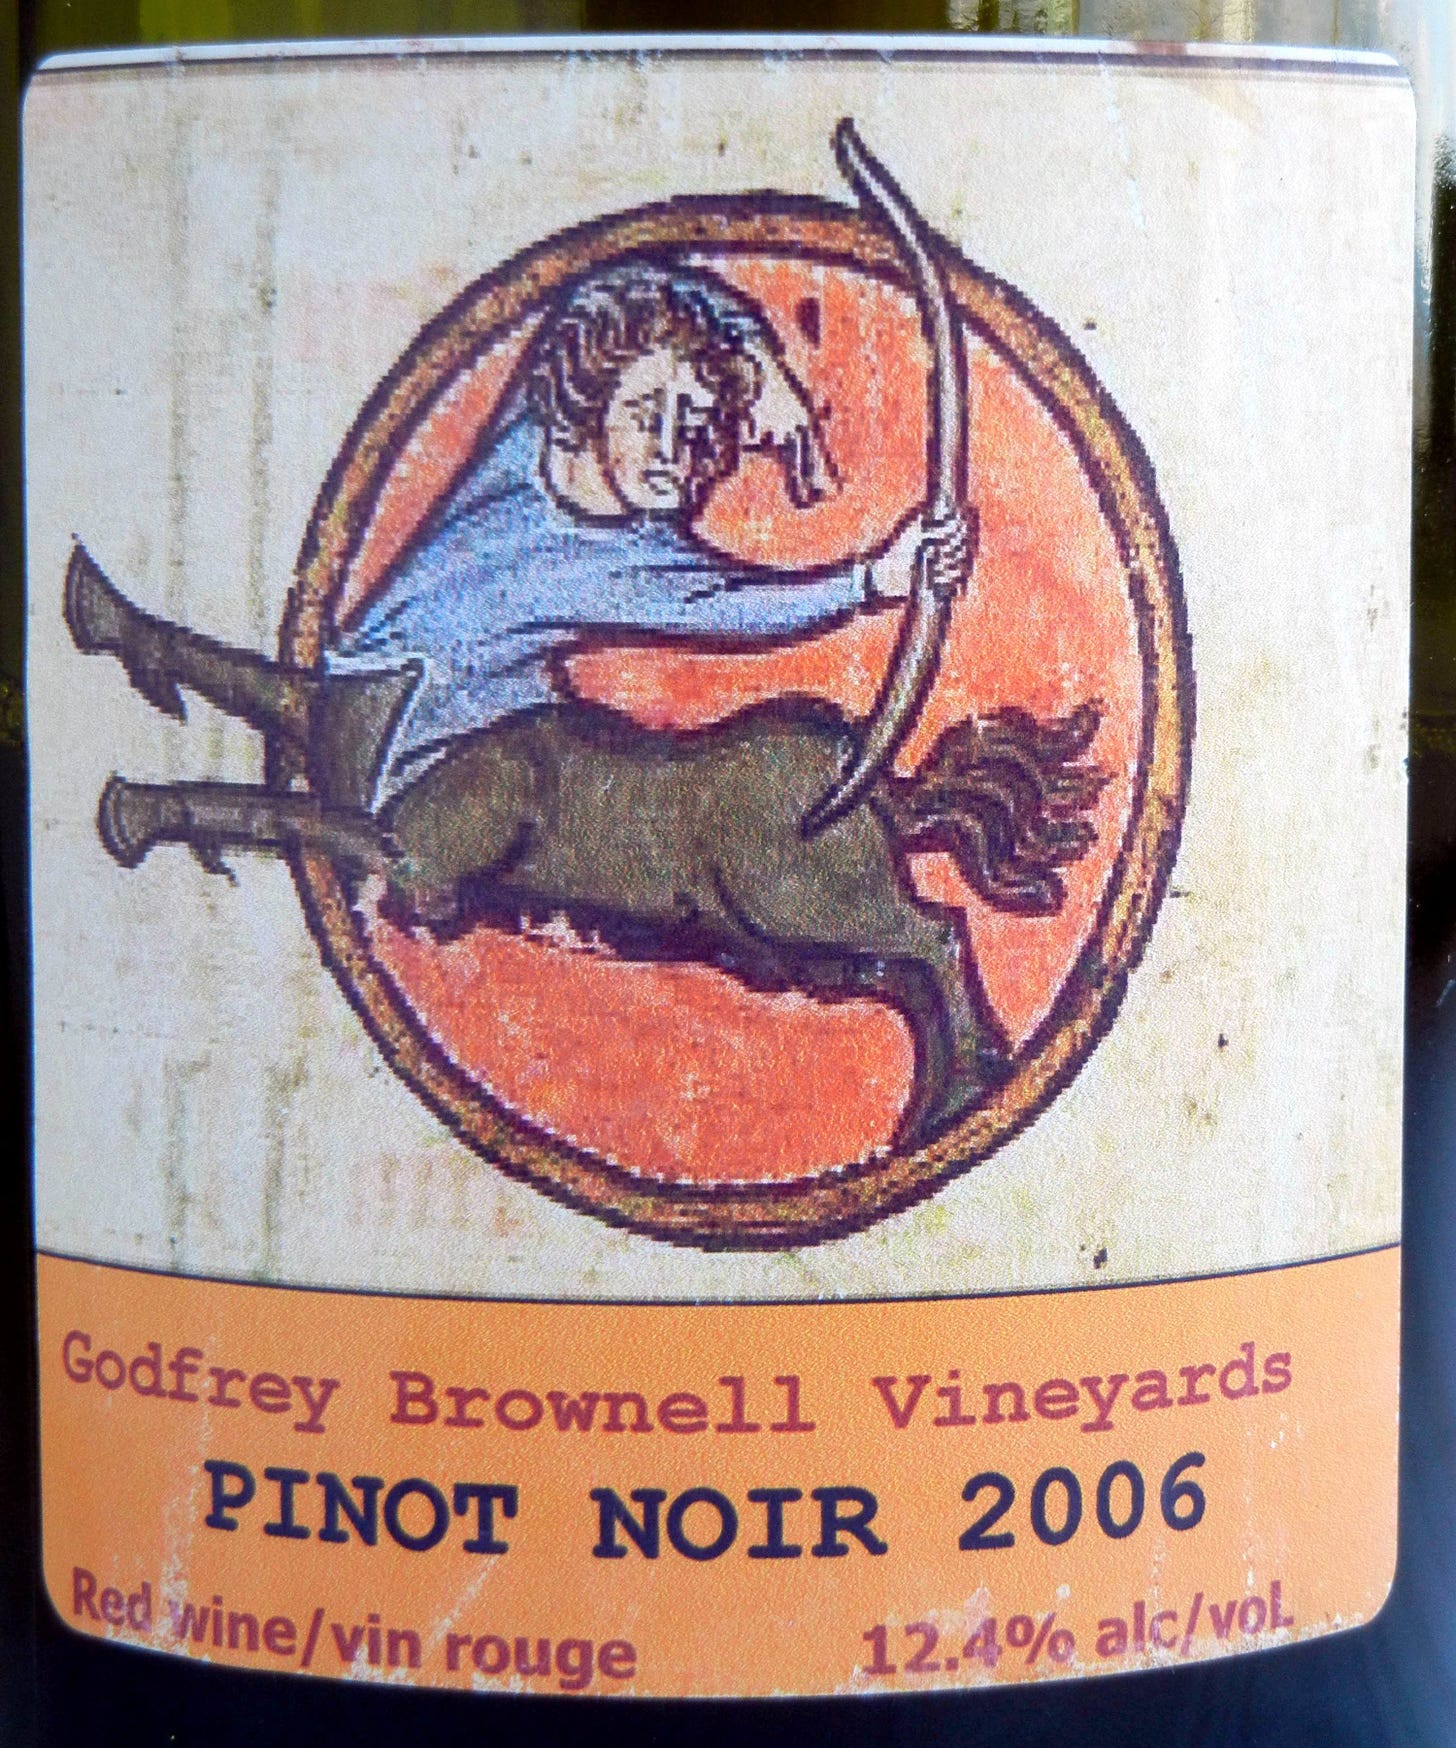 Godfrey Brownell Pinot Noir 2006 Label - BC Pinot Noir Tasting Review 12